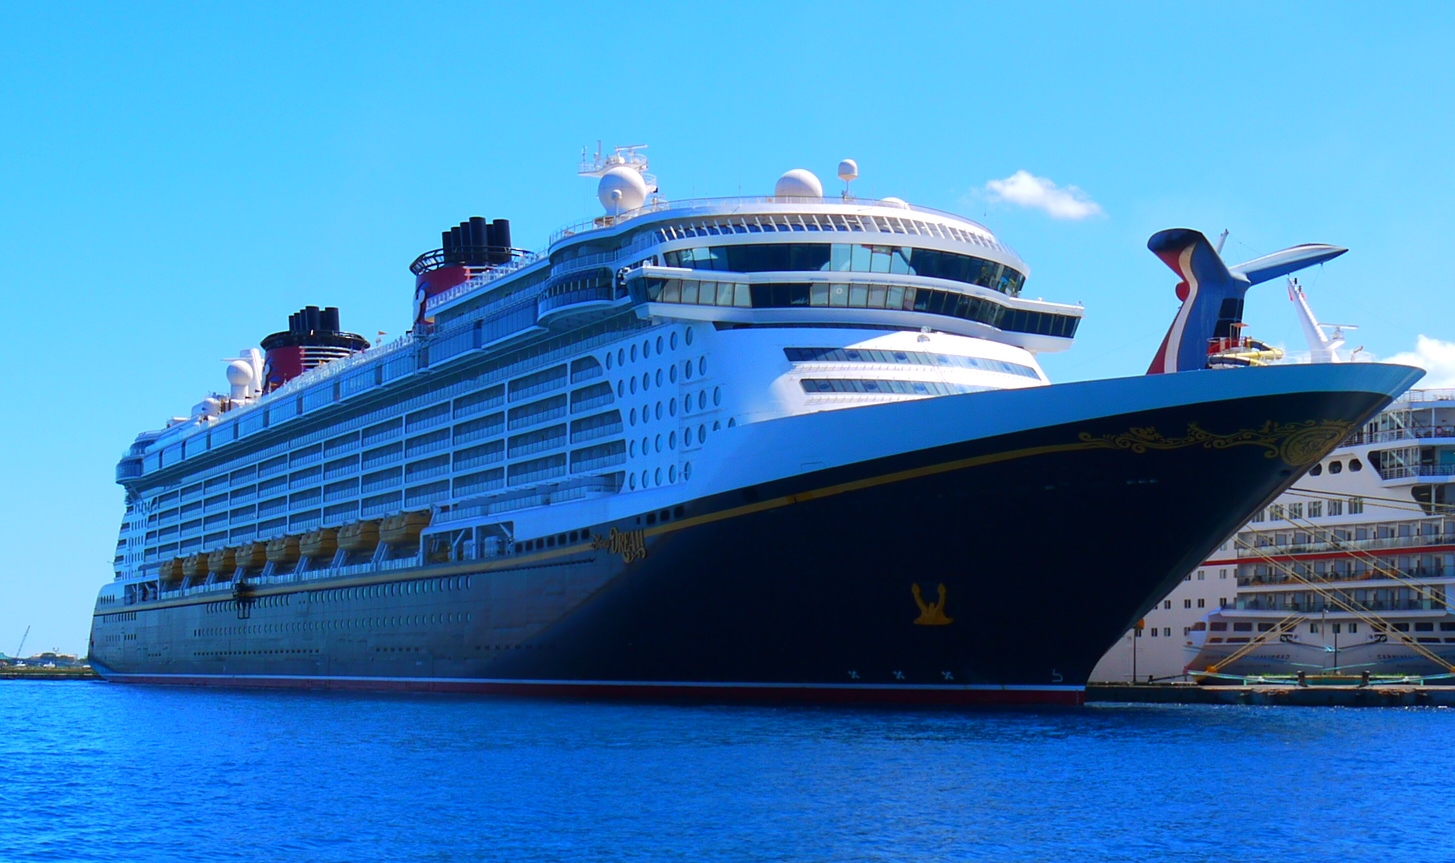 Enter the Secrets to a Dream Cruise Vacation Sweepstakes